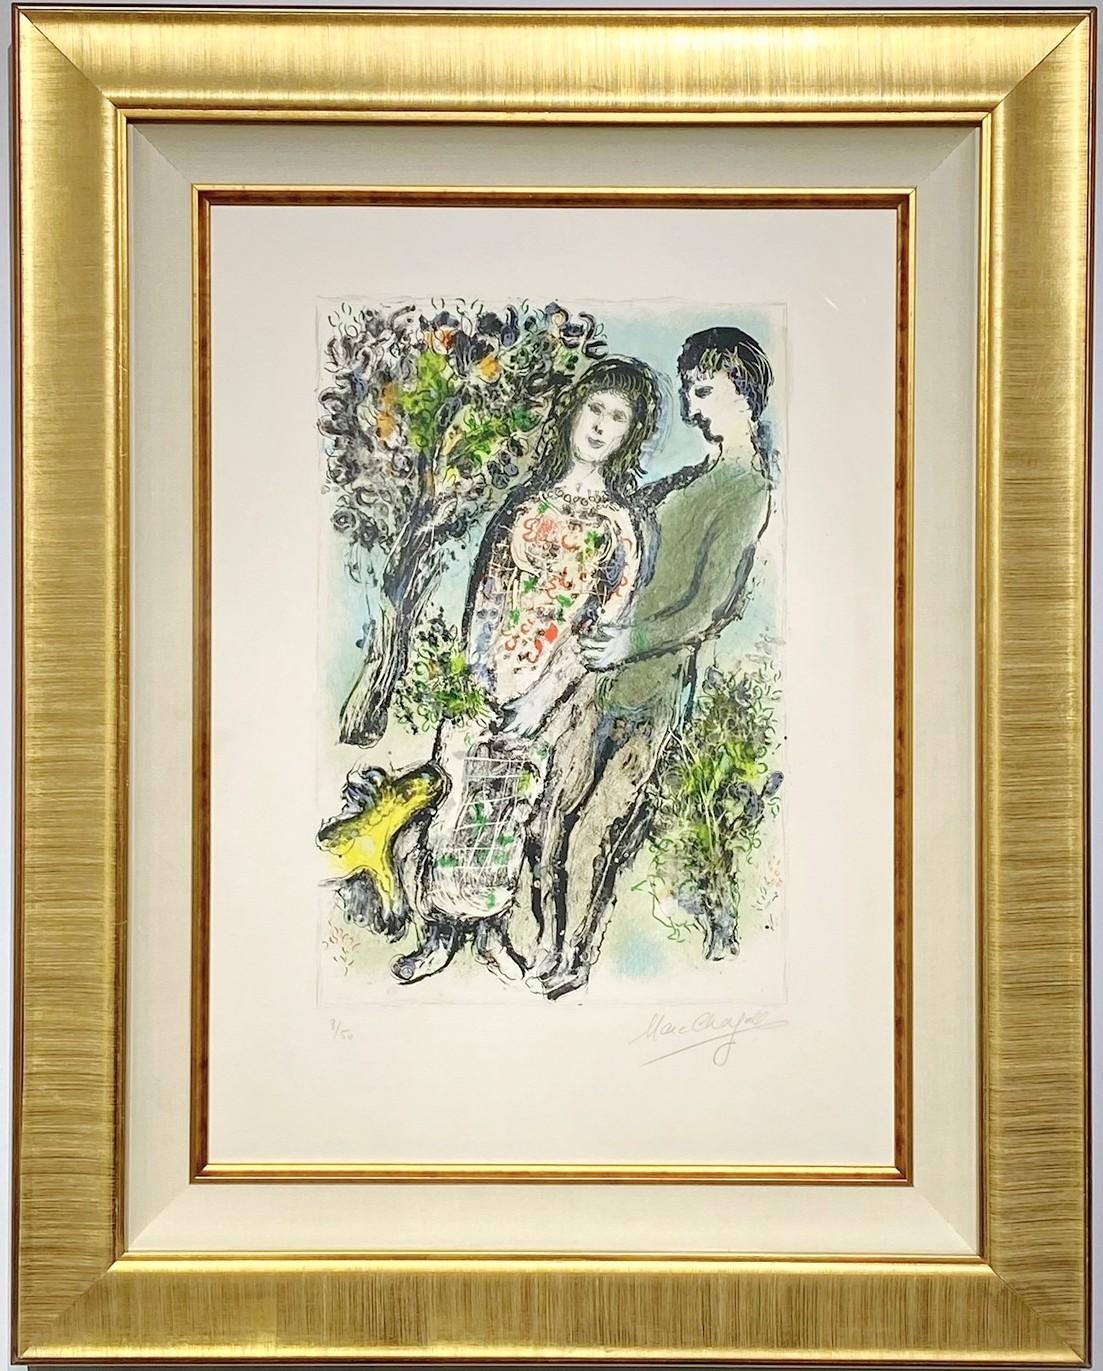 Marc Chagall - Marc Chagall ”L’Oranger” For Sale at 1stDibs